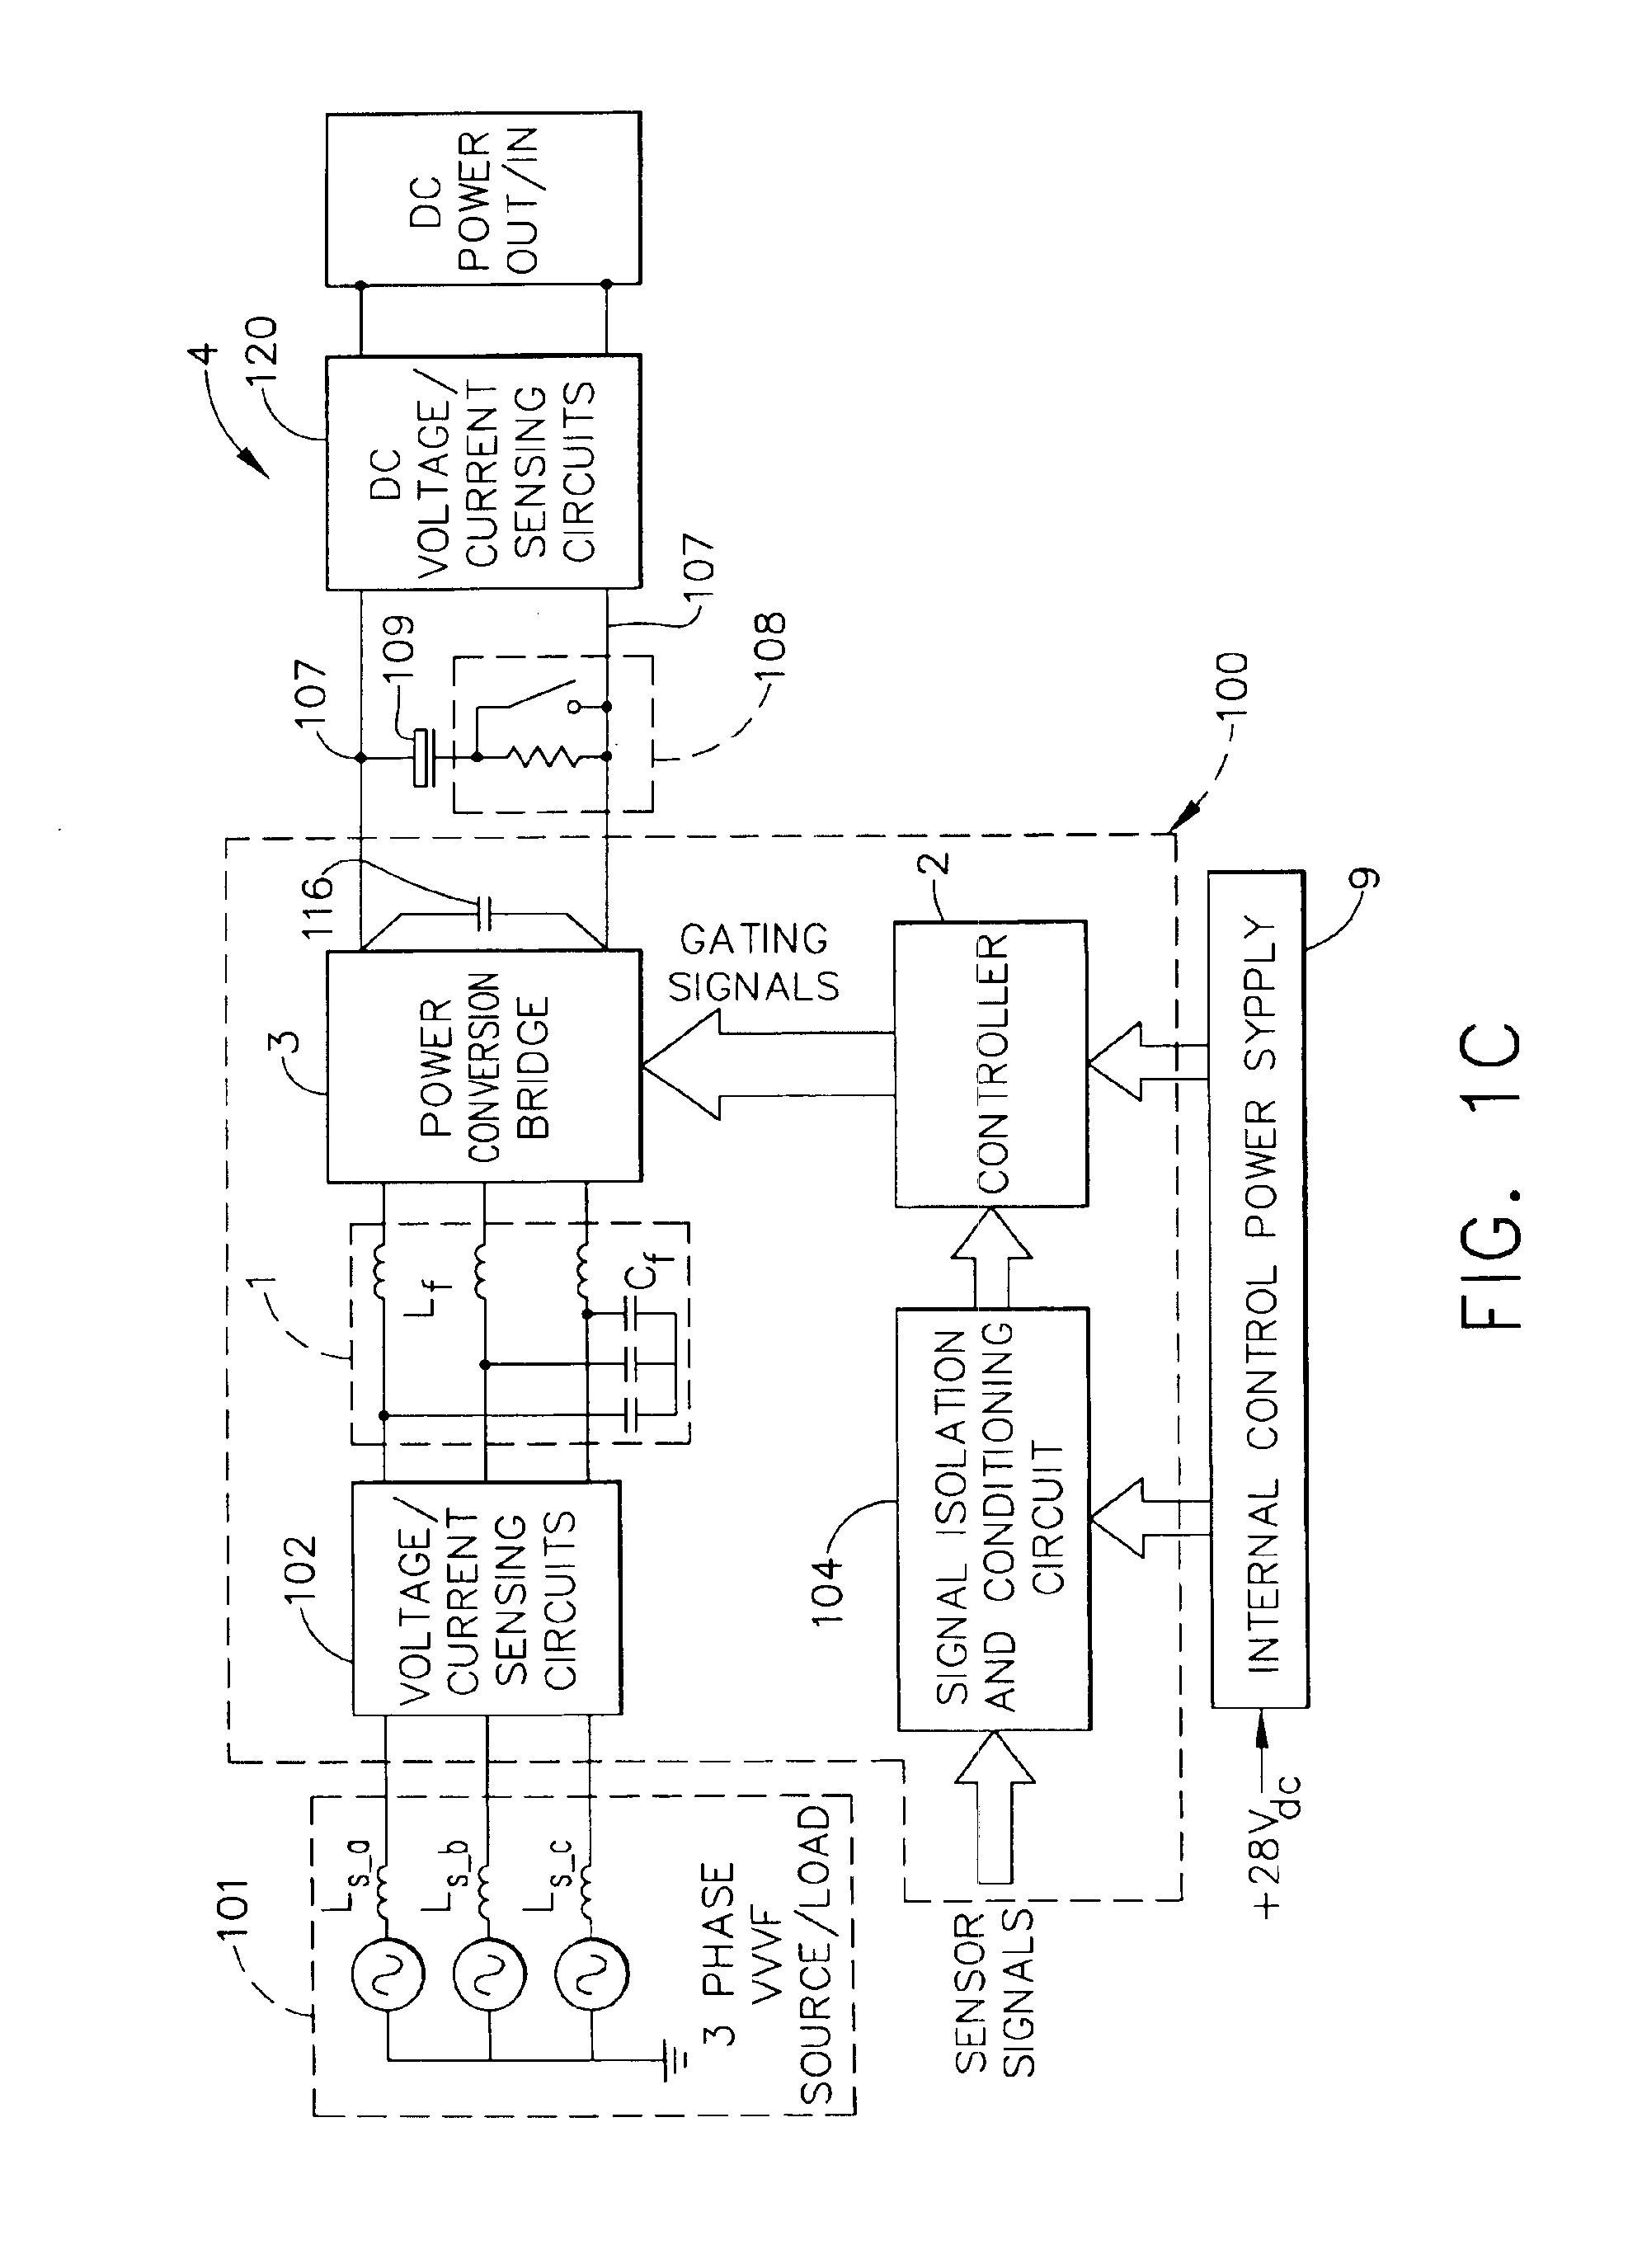 Synchronous and bi-directional variable frequency power conversion systems